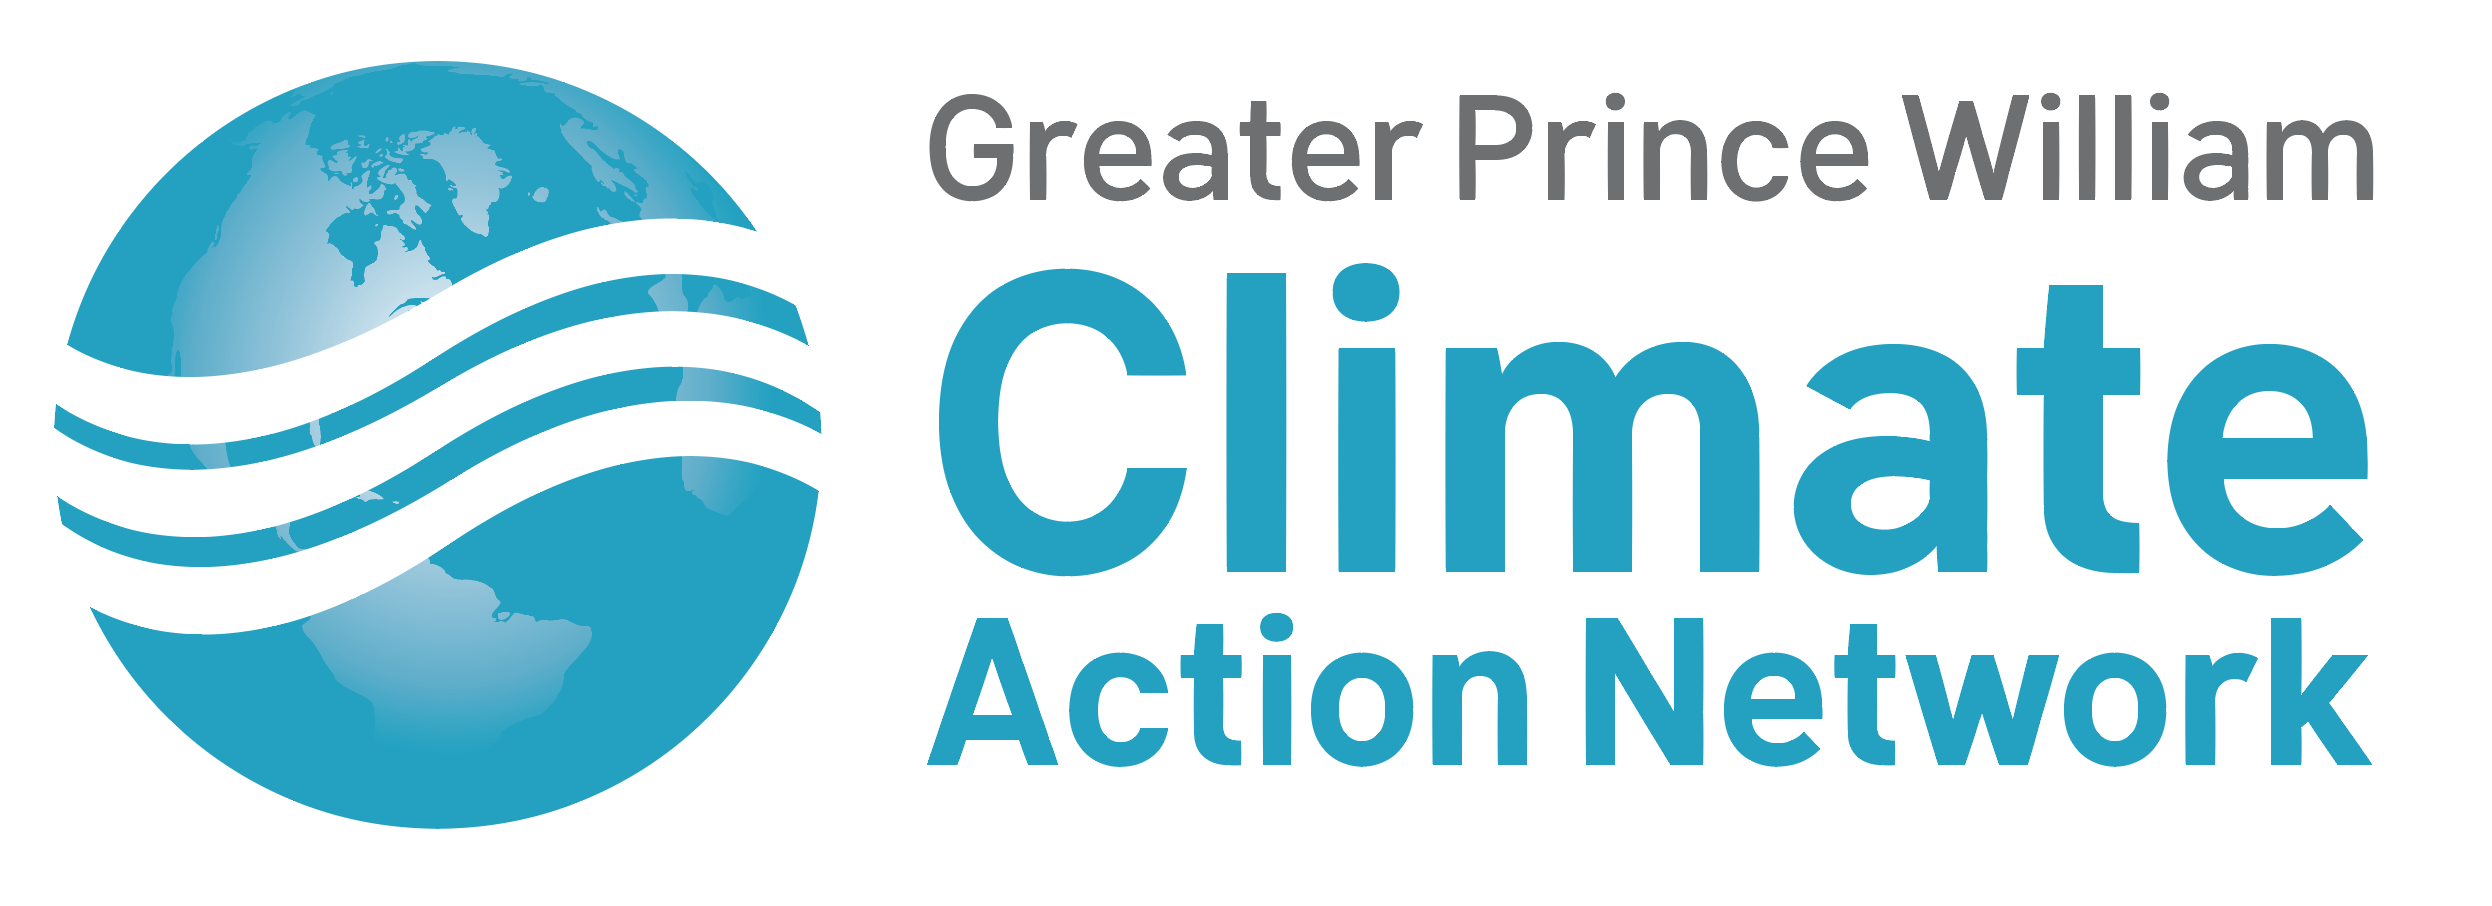 Greater Prince William Climate Action Network.png